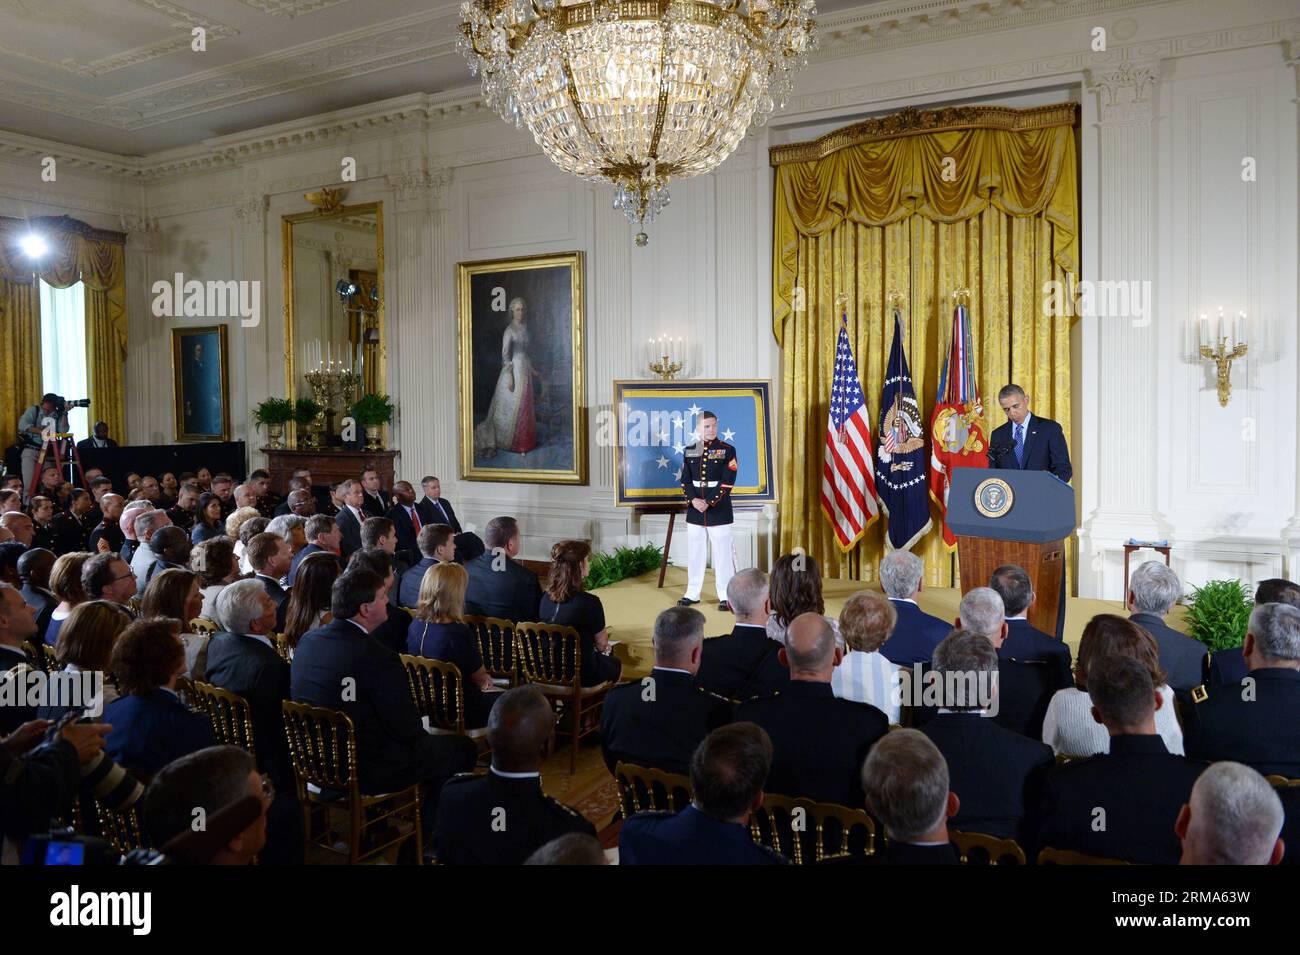 (140619) -- WASHINGTON D.C., June 19, 2014 (Xinhua) -- U.S. President Barack Obama (R) speaks at a ceremony for awarding William Kyle Carpenter (L) with the Medal of Honor in the East Room of the White House in Washington D.C., the United States, on June 19, 2014. Carpenter received the medal for covering a grenade to save fellow Marines during a Taliban attack in November 2010. Carpenter is the eighth living recipient chosen for the highest military award. (Xinhua/Yin Bogu) US-WASHINGTON D.C.-MEDAL OF HONOR-CARPENTER PUBLICATIONxNOTxINxCHN   Washington D C June 19 2014 XINHUA U S President Ba Stock Photo